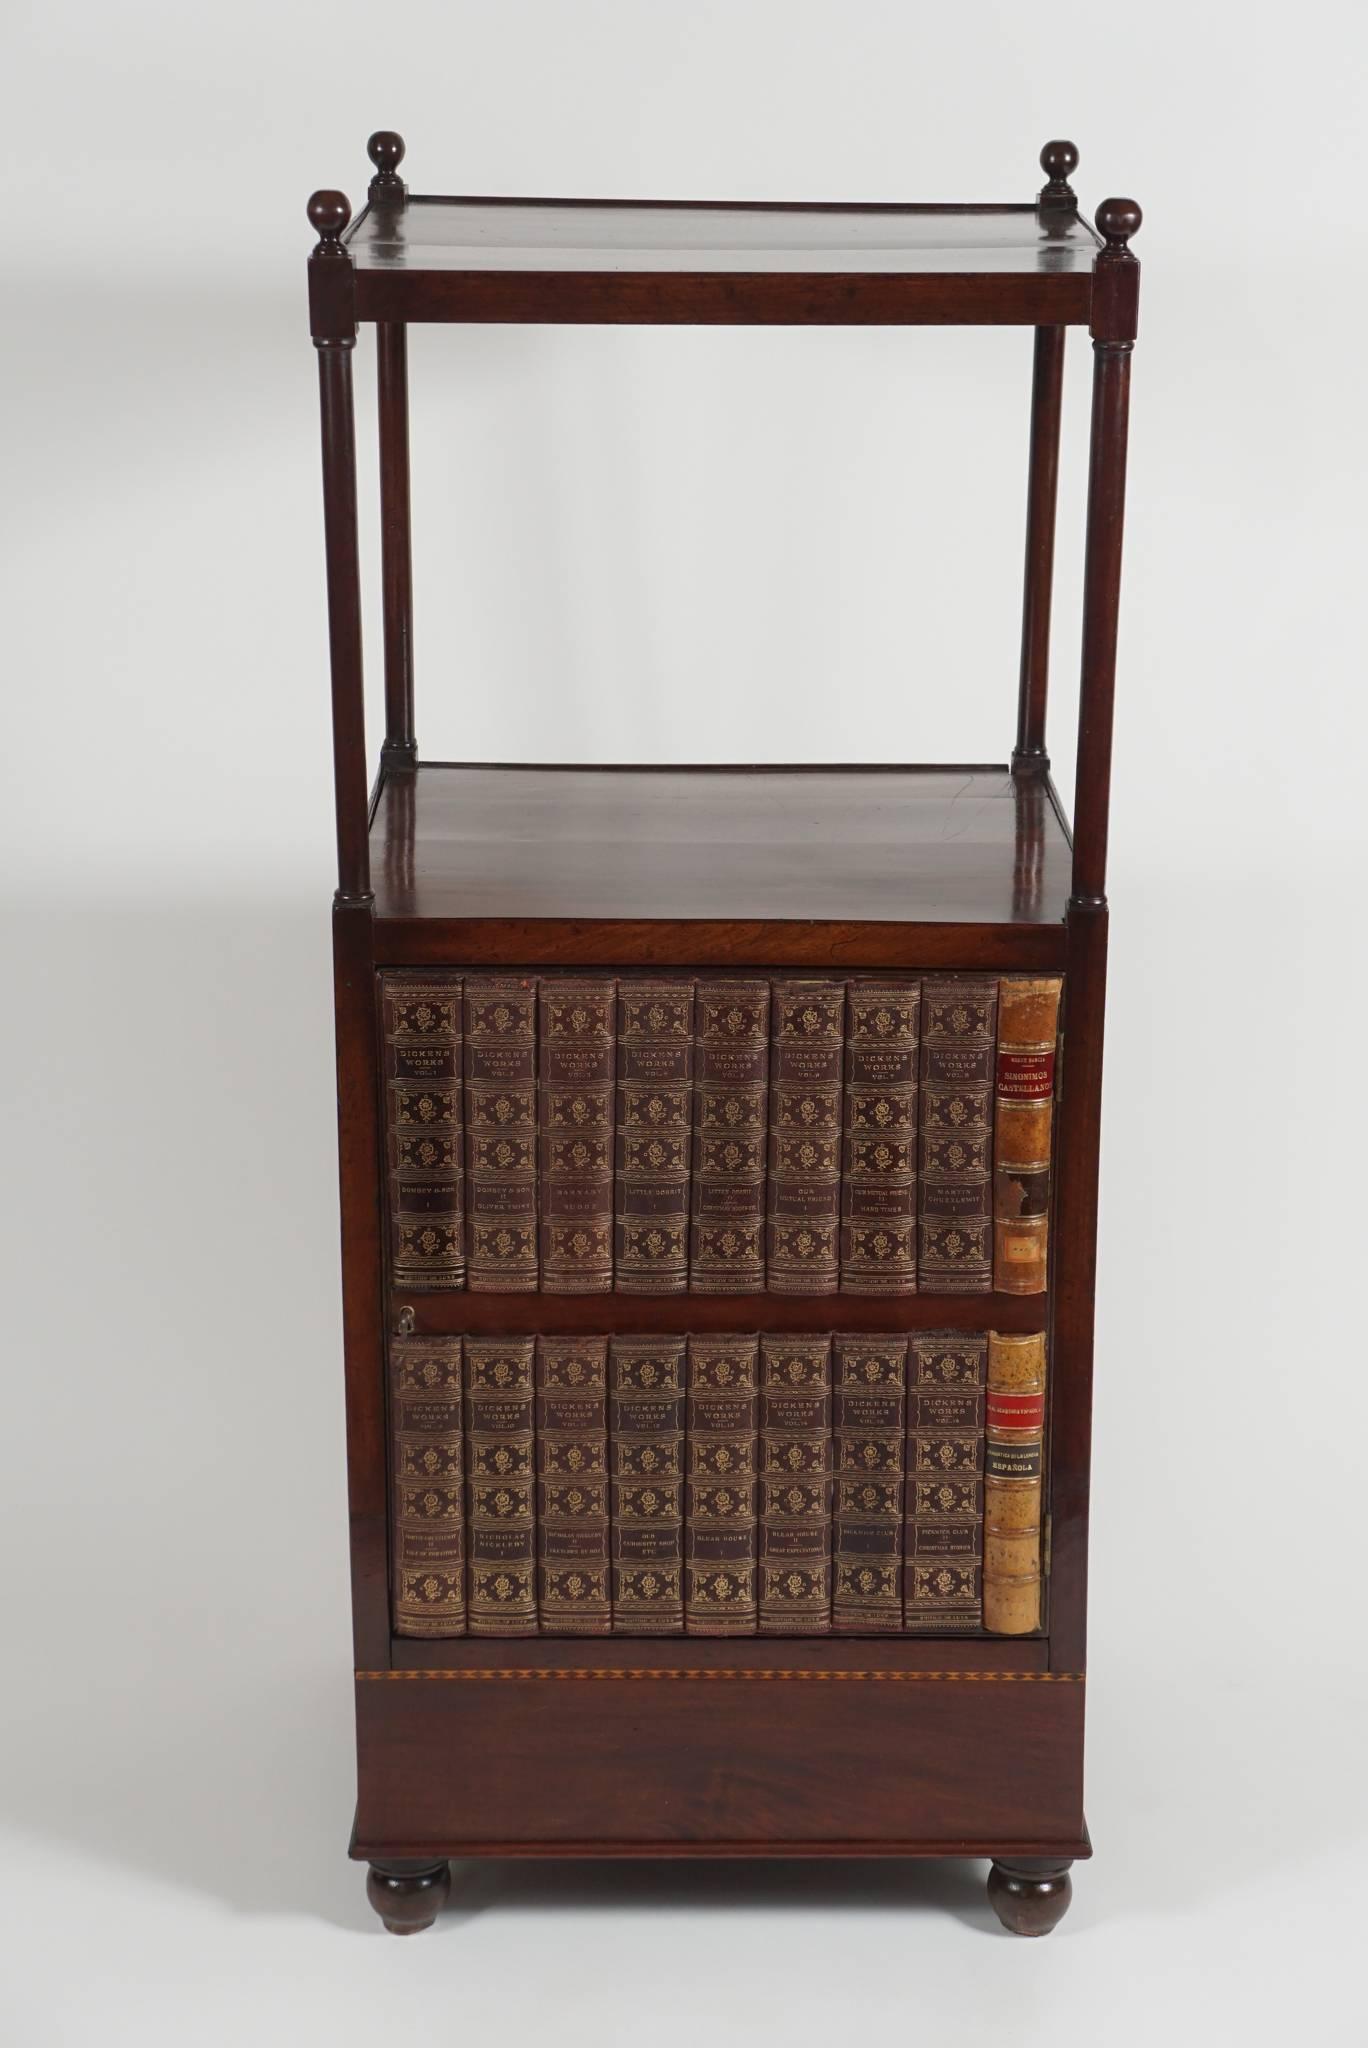 English Regency Period Mahogany Étagère or Library Stand, circa 1815 In Good Condition For Sale In Kinderhook, NY